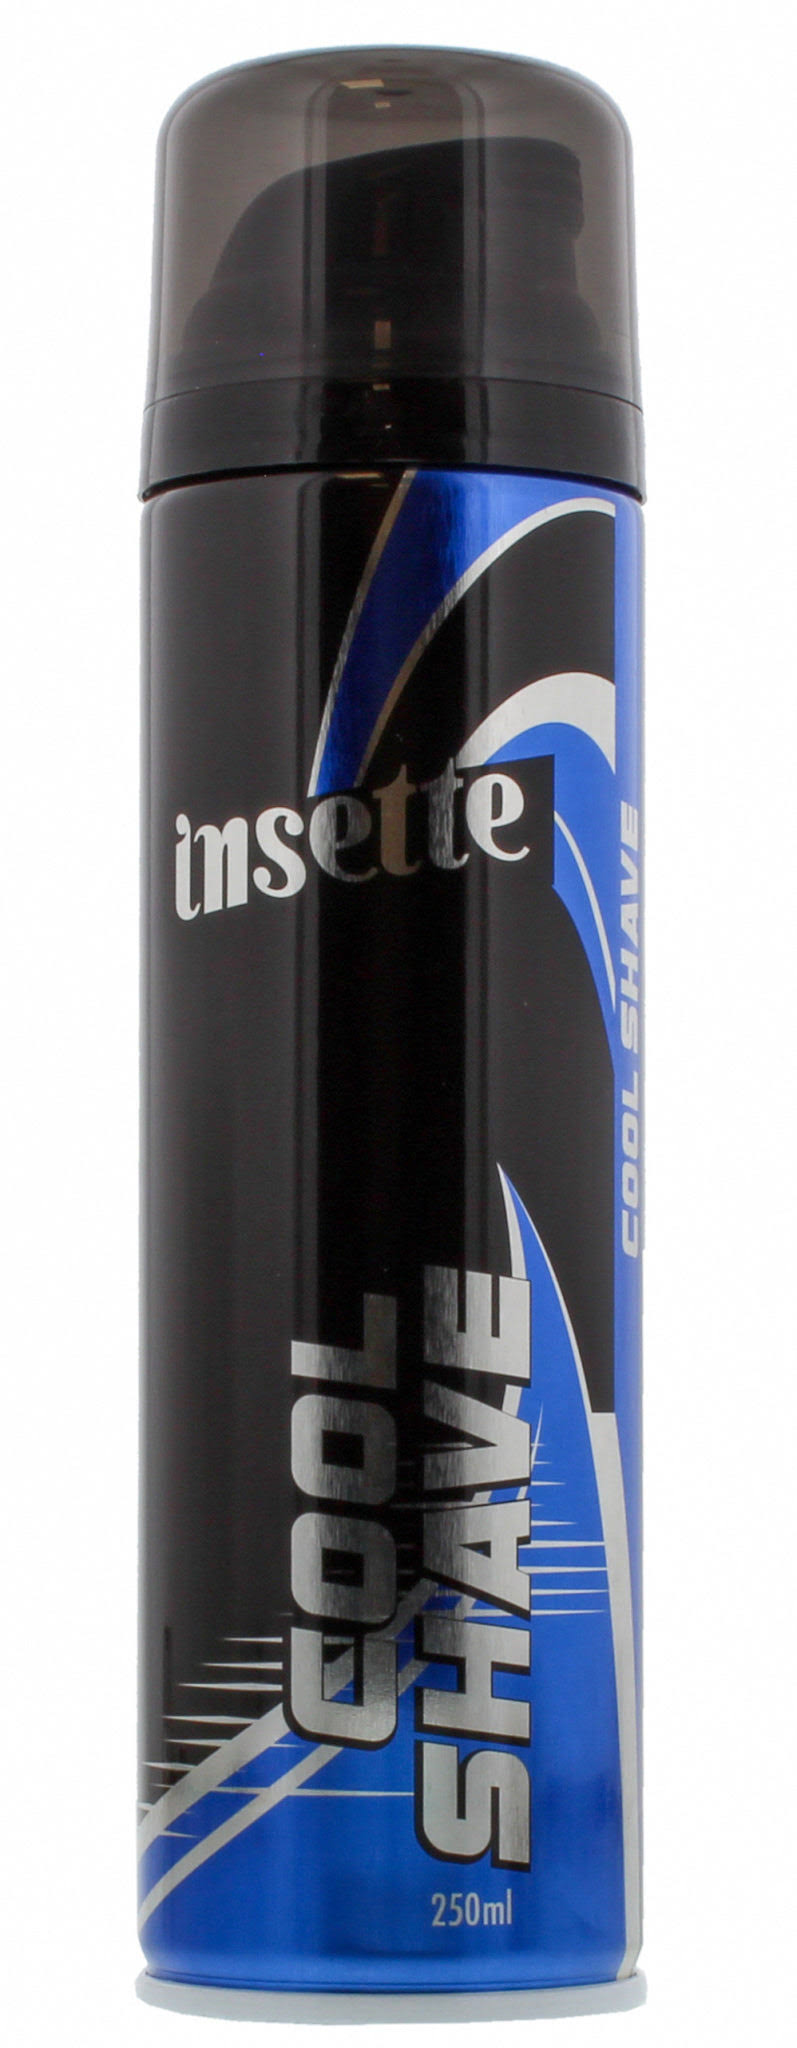 12 x Insette 250ml Shave Foam Cool Shave - 16/11/2024 - Use